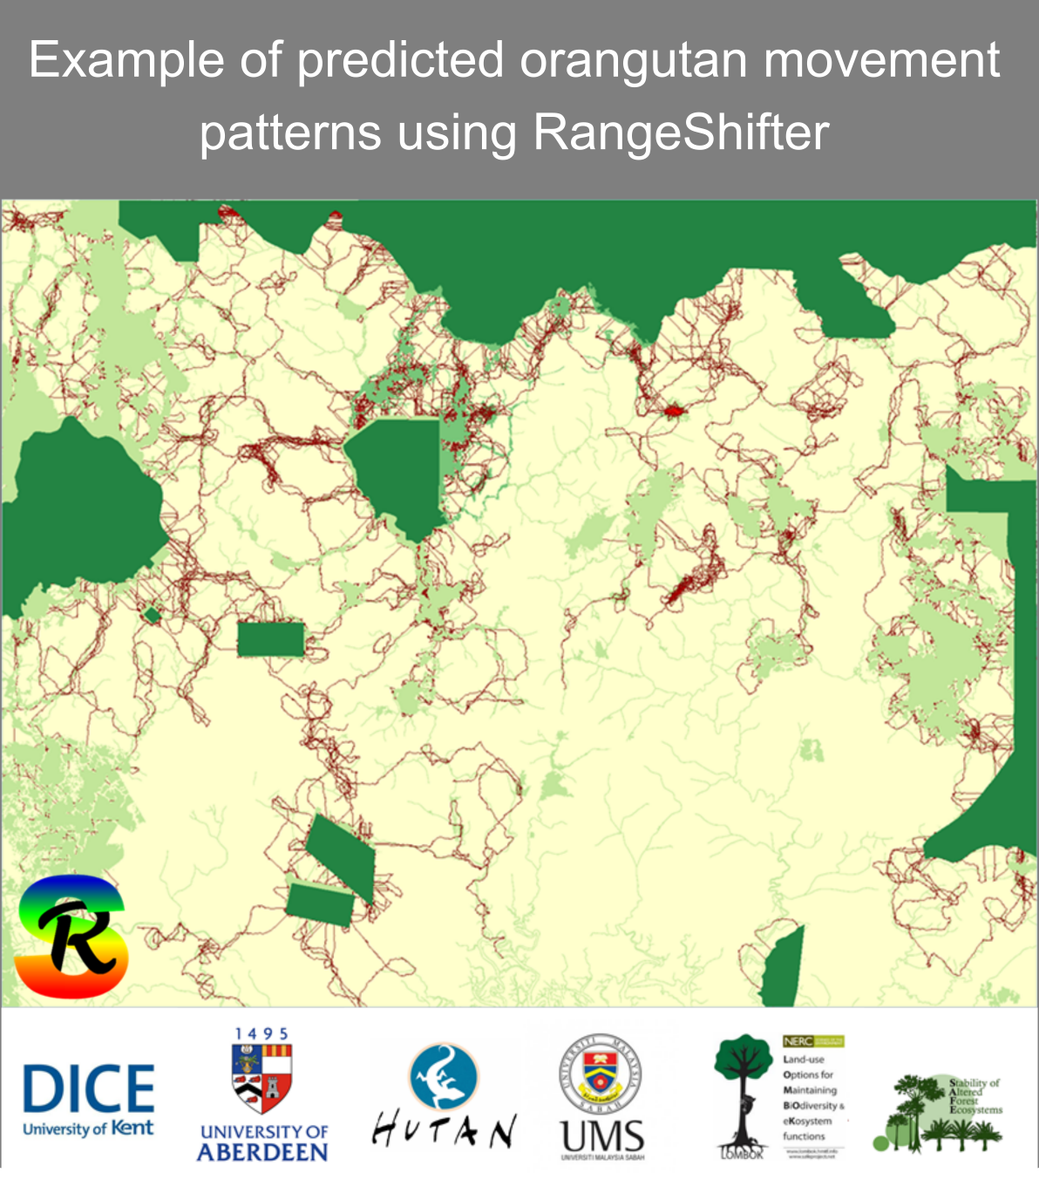 5/6 To work this out I’m using individual based models to predict  movements in oil palm estates, to assess population viability & to evaluate effects of different management options. Here’s a cool example using  #RangeShifter  #DICECON20  #SpsMon2